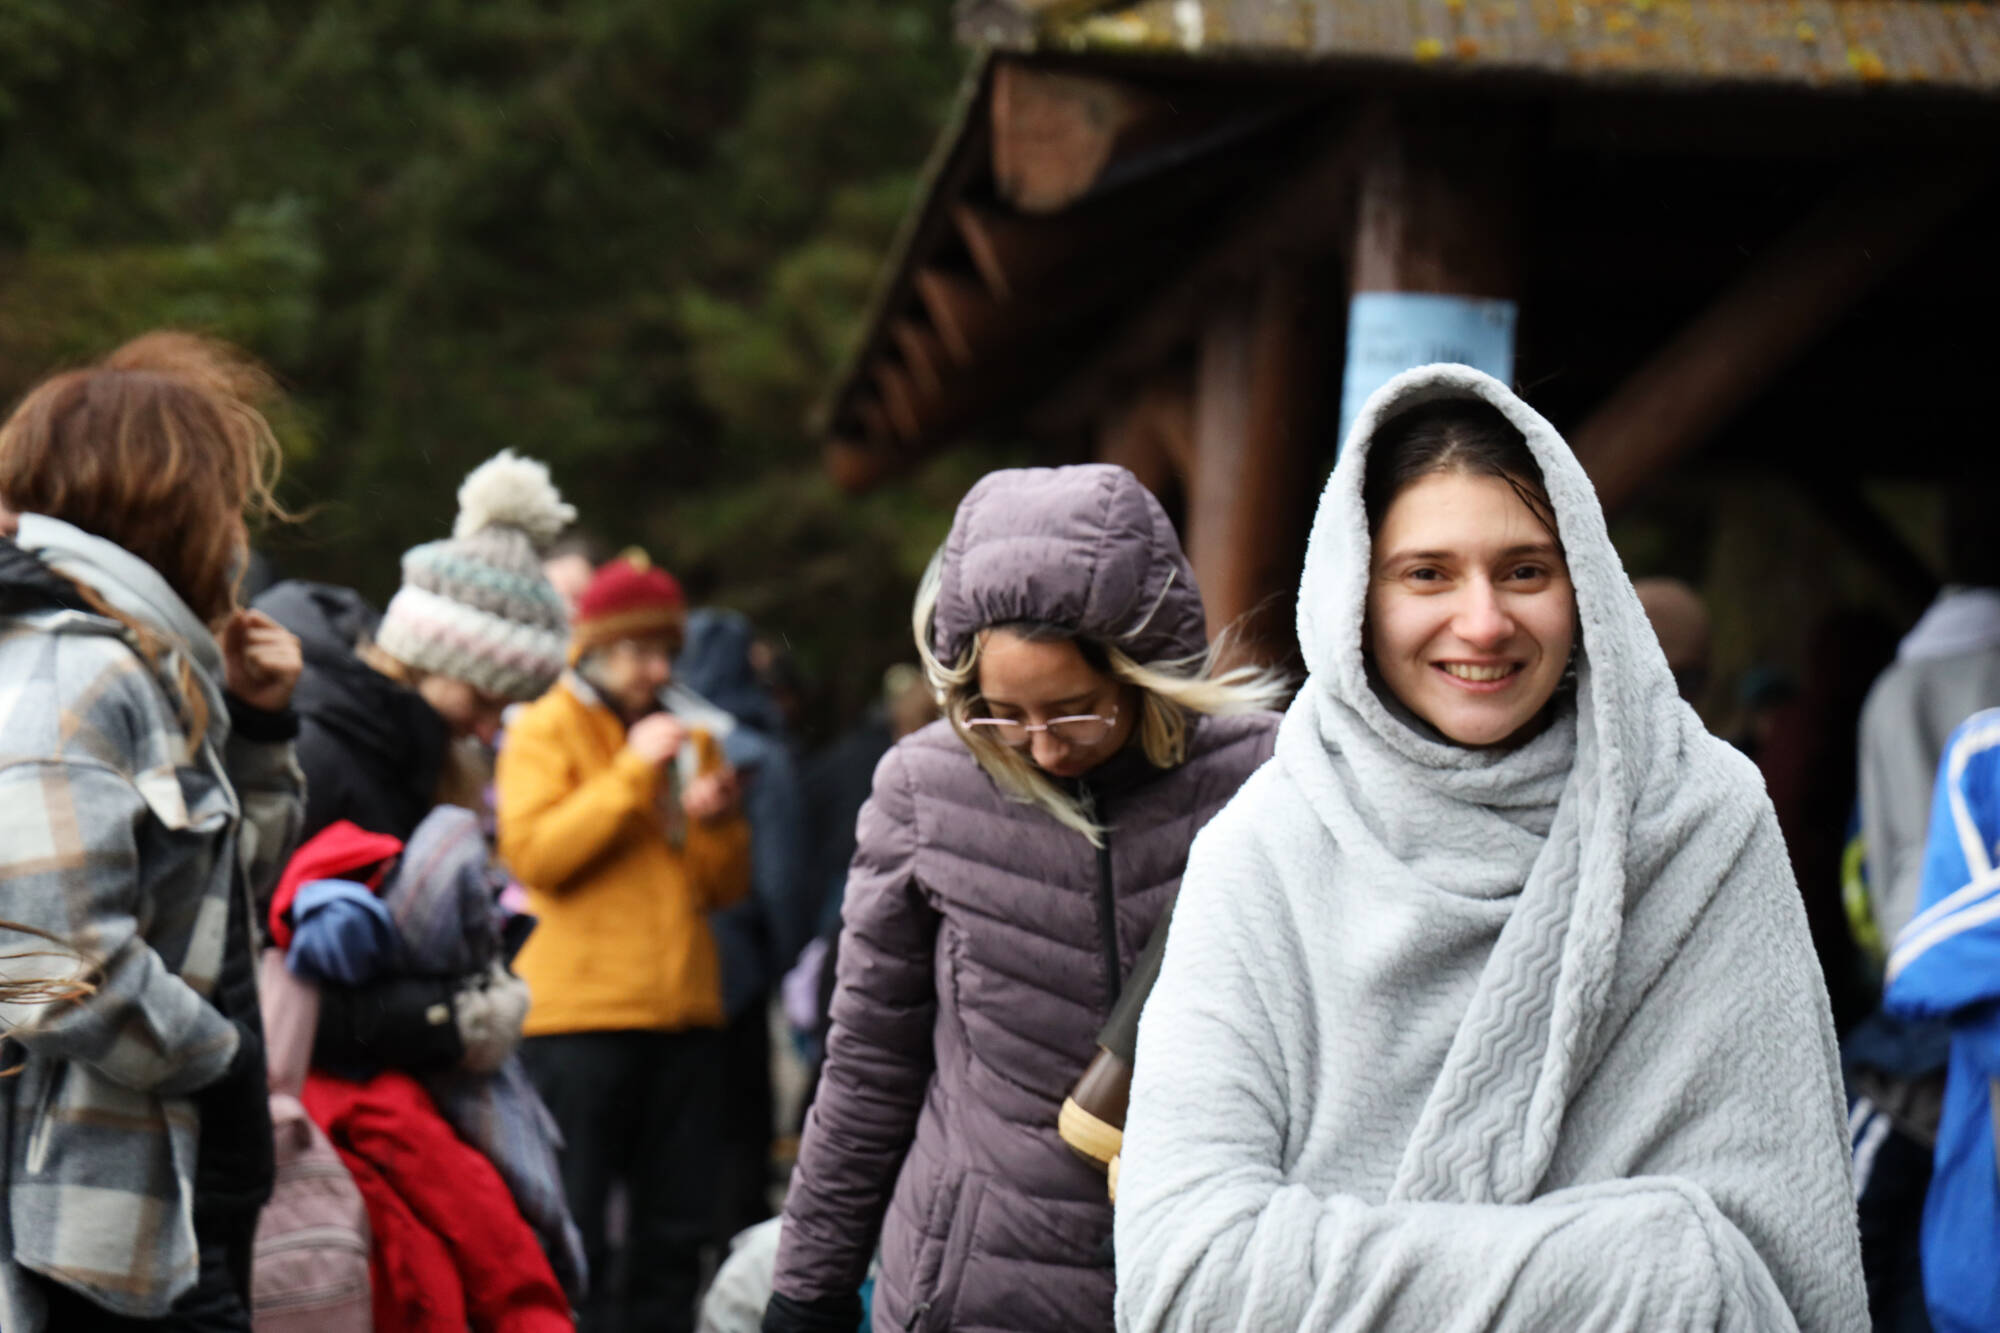 Lourdes Marteleur smiles while wrapped in a blanket after participating in the annual Polar Dip at the Auke Recreation Area Sunday afternoon. (Clarise Larson / Juneau Empire)